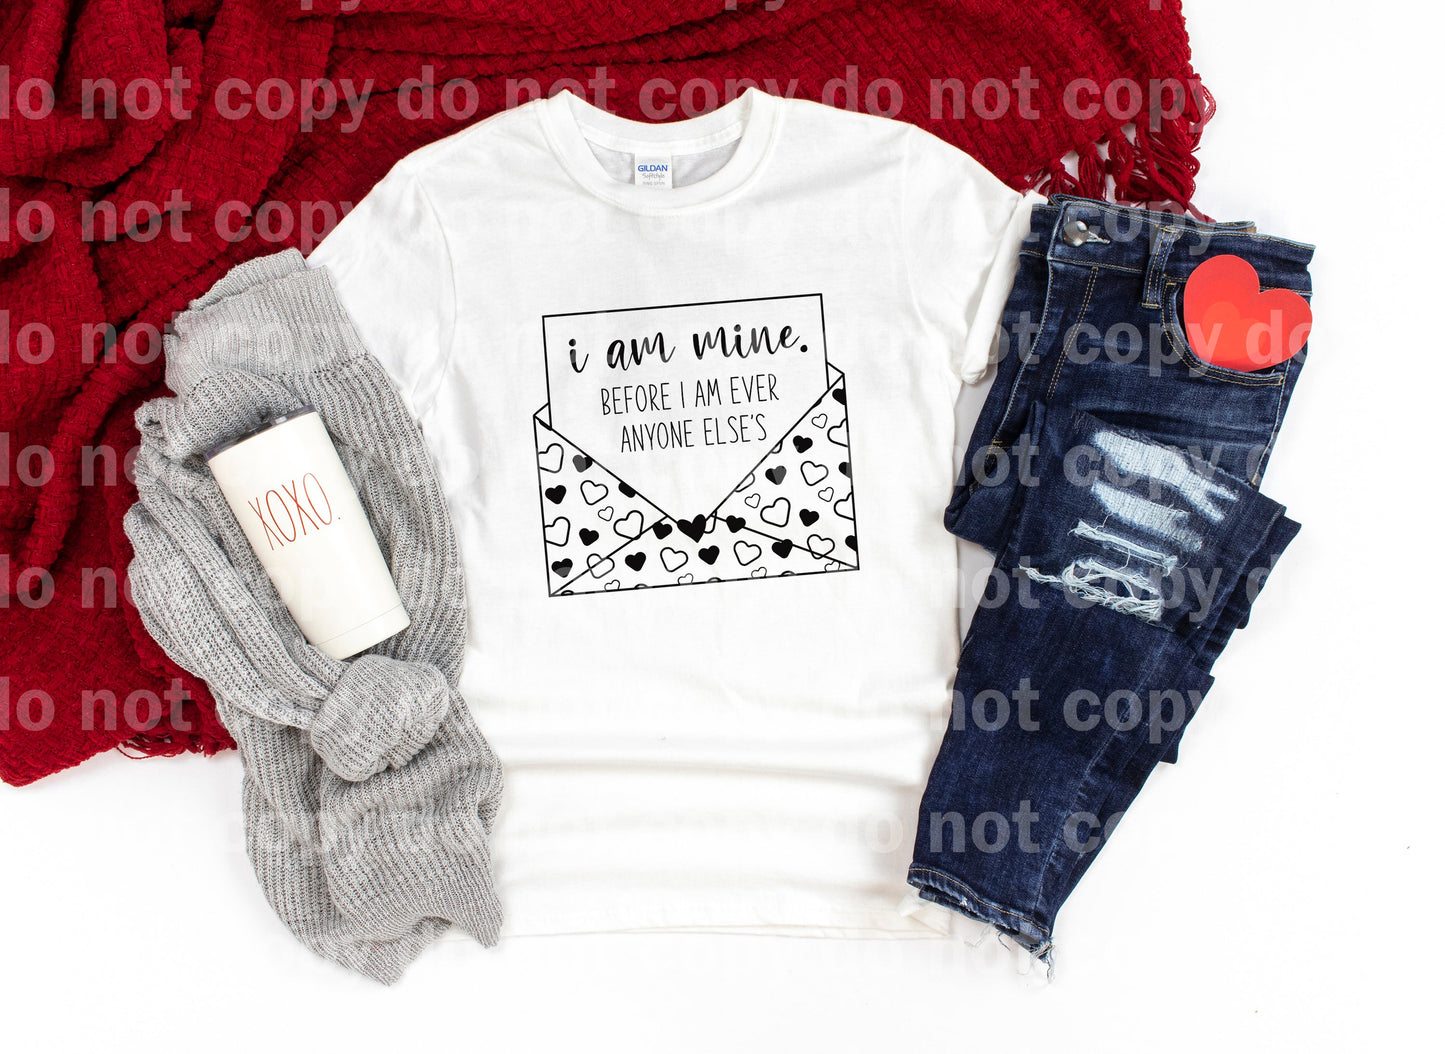 I Am Mine Before I Am Ever Anyone Else's Full Color/One Color Dream Print or Sublimation Print